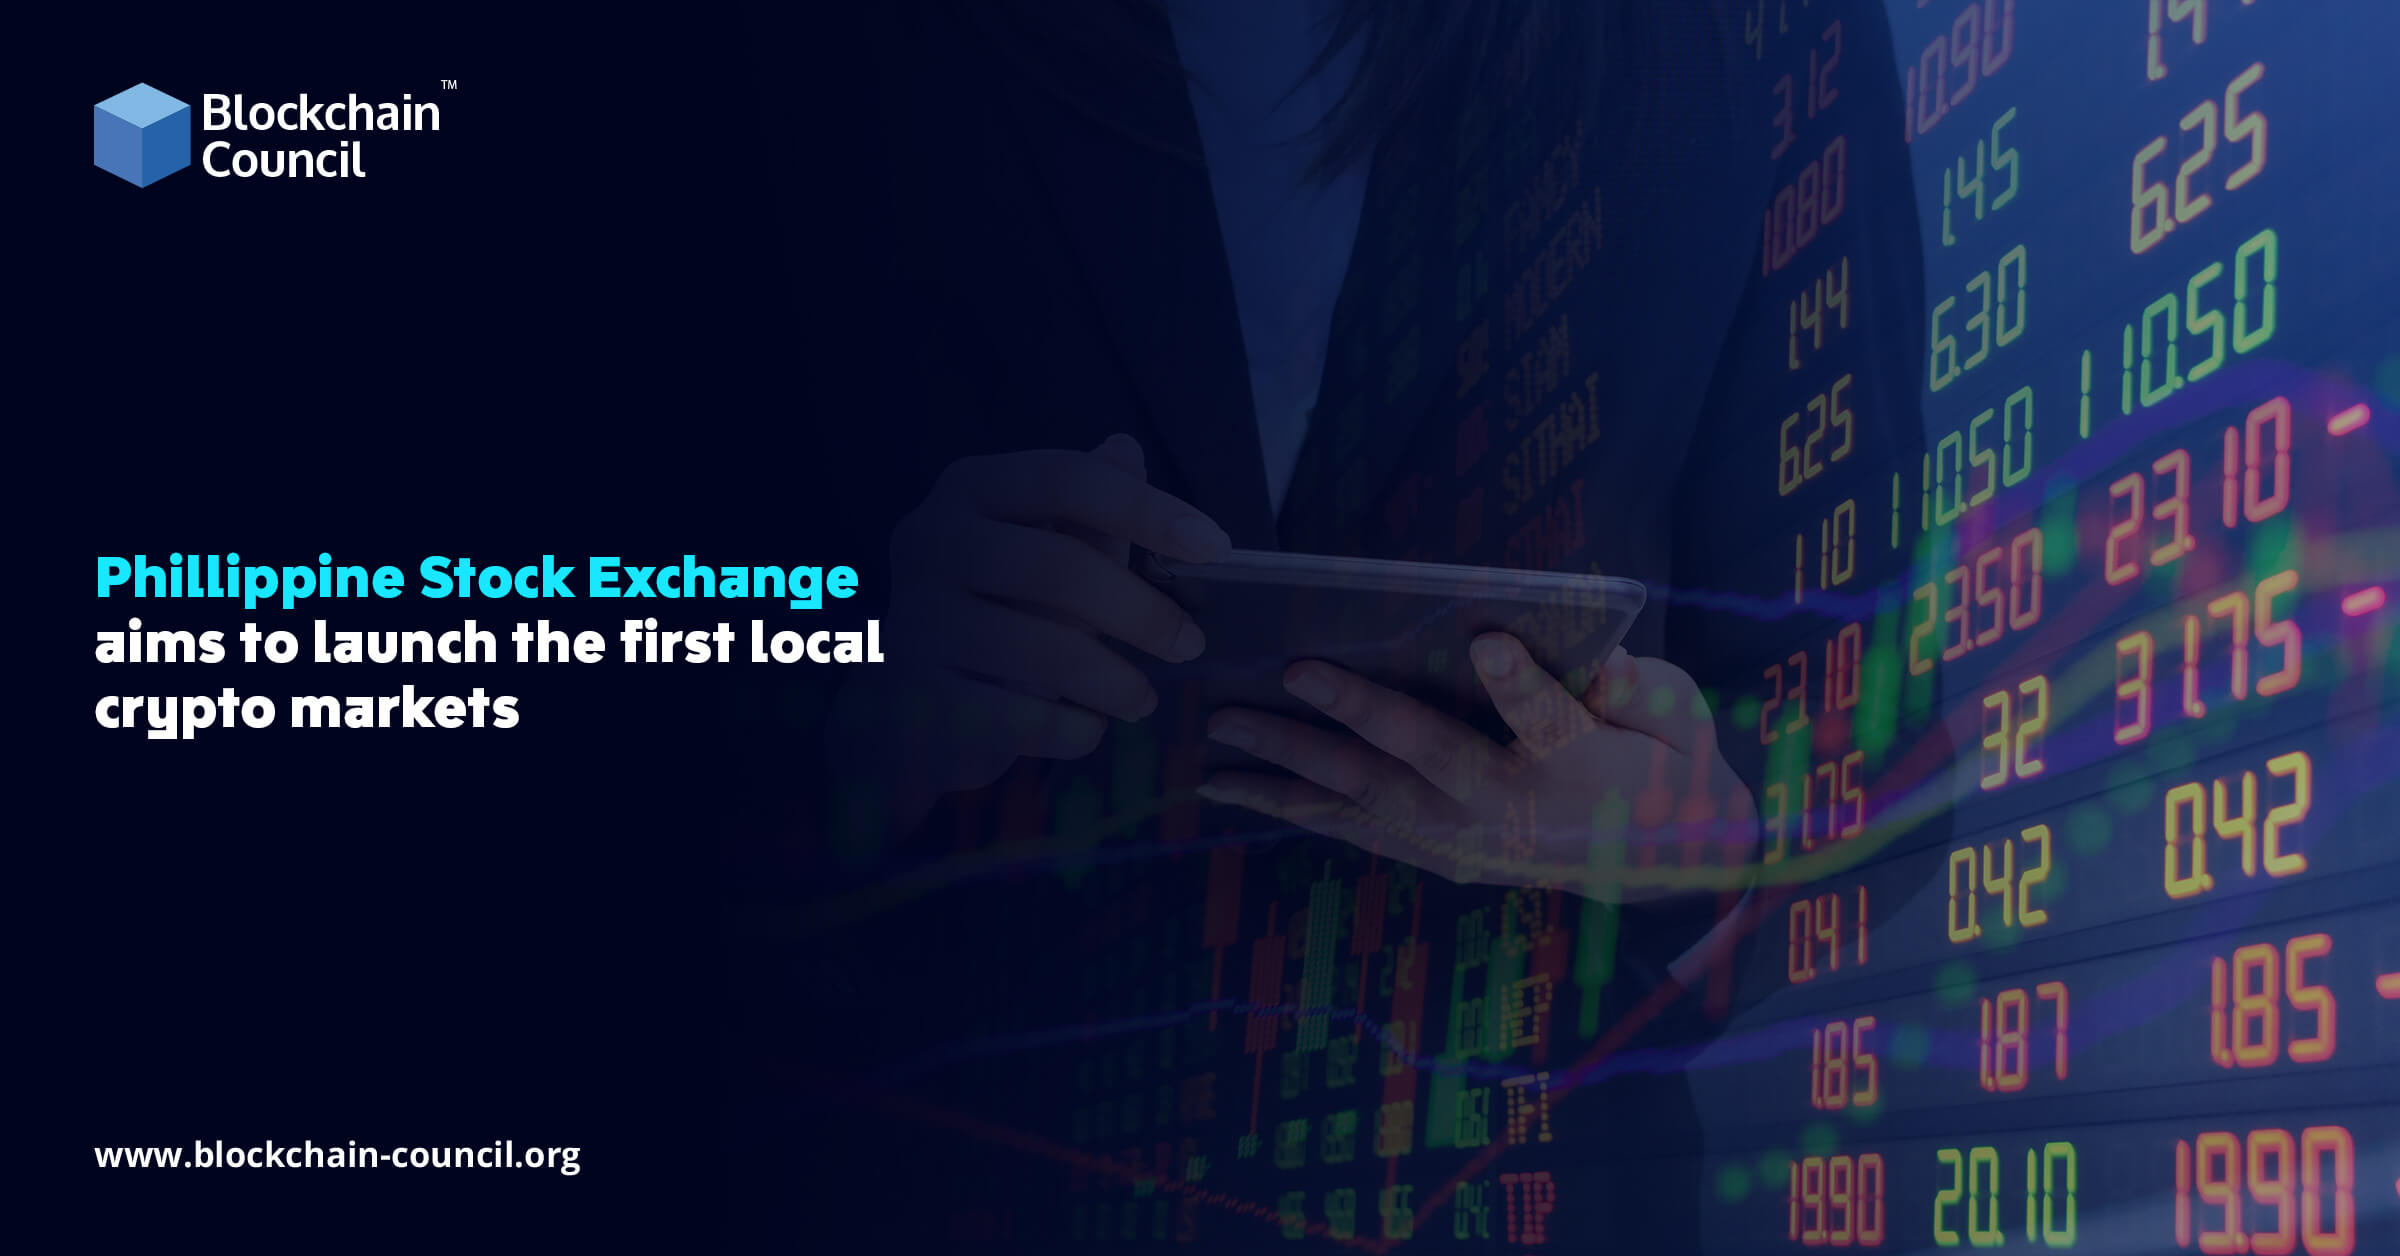 Phillippine Stock Exchange aims to launch the first local crypto markets